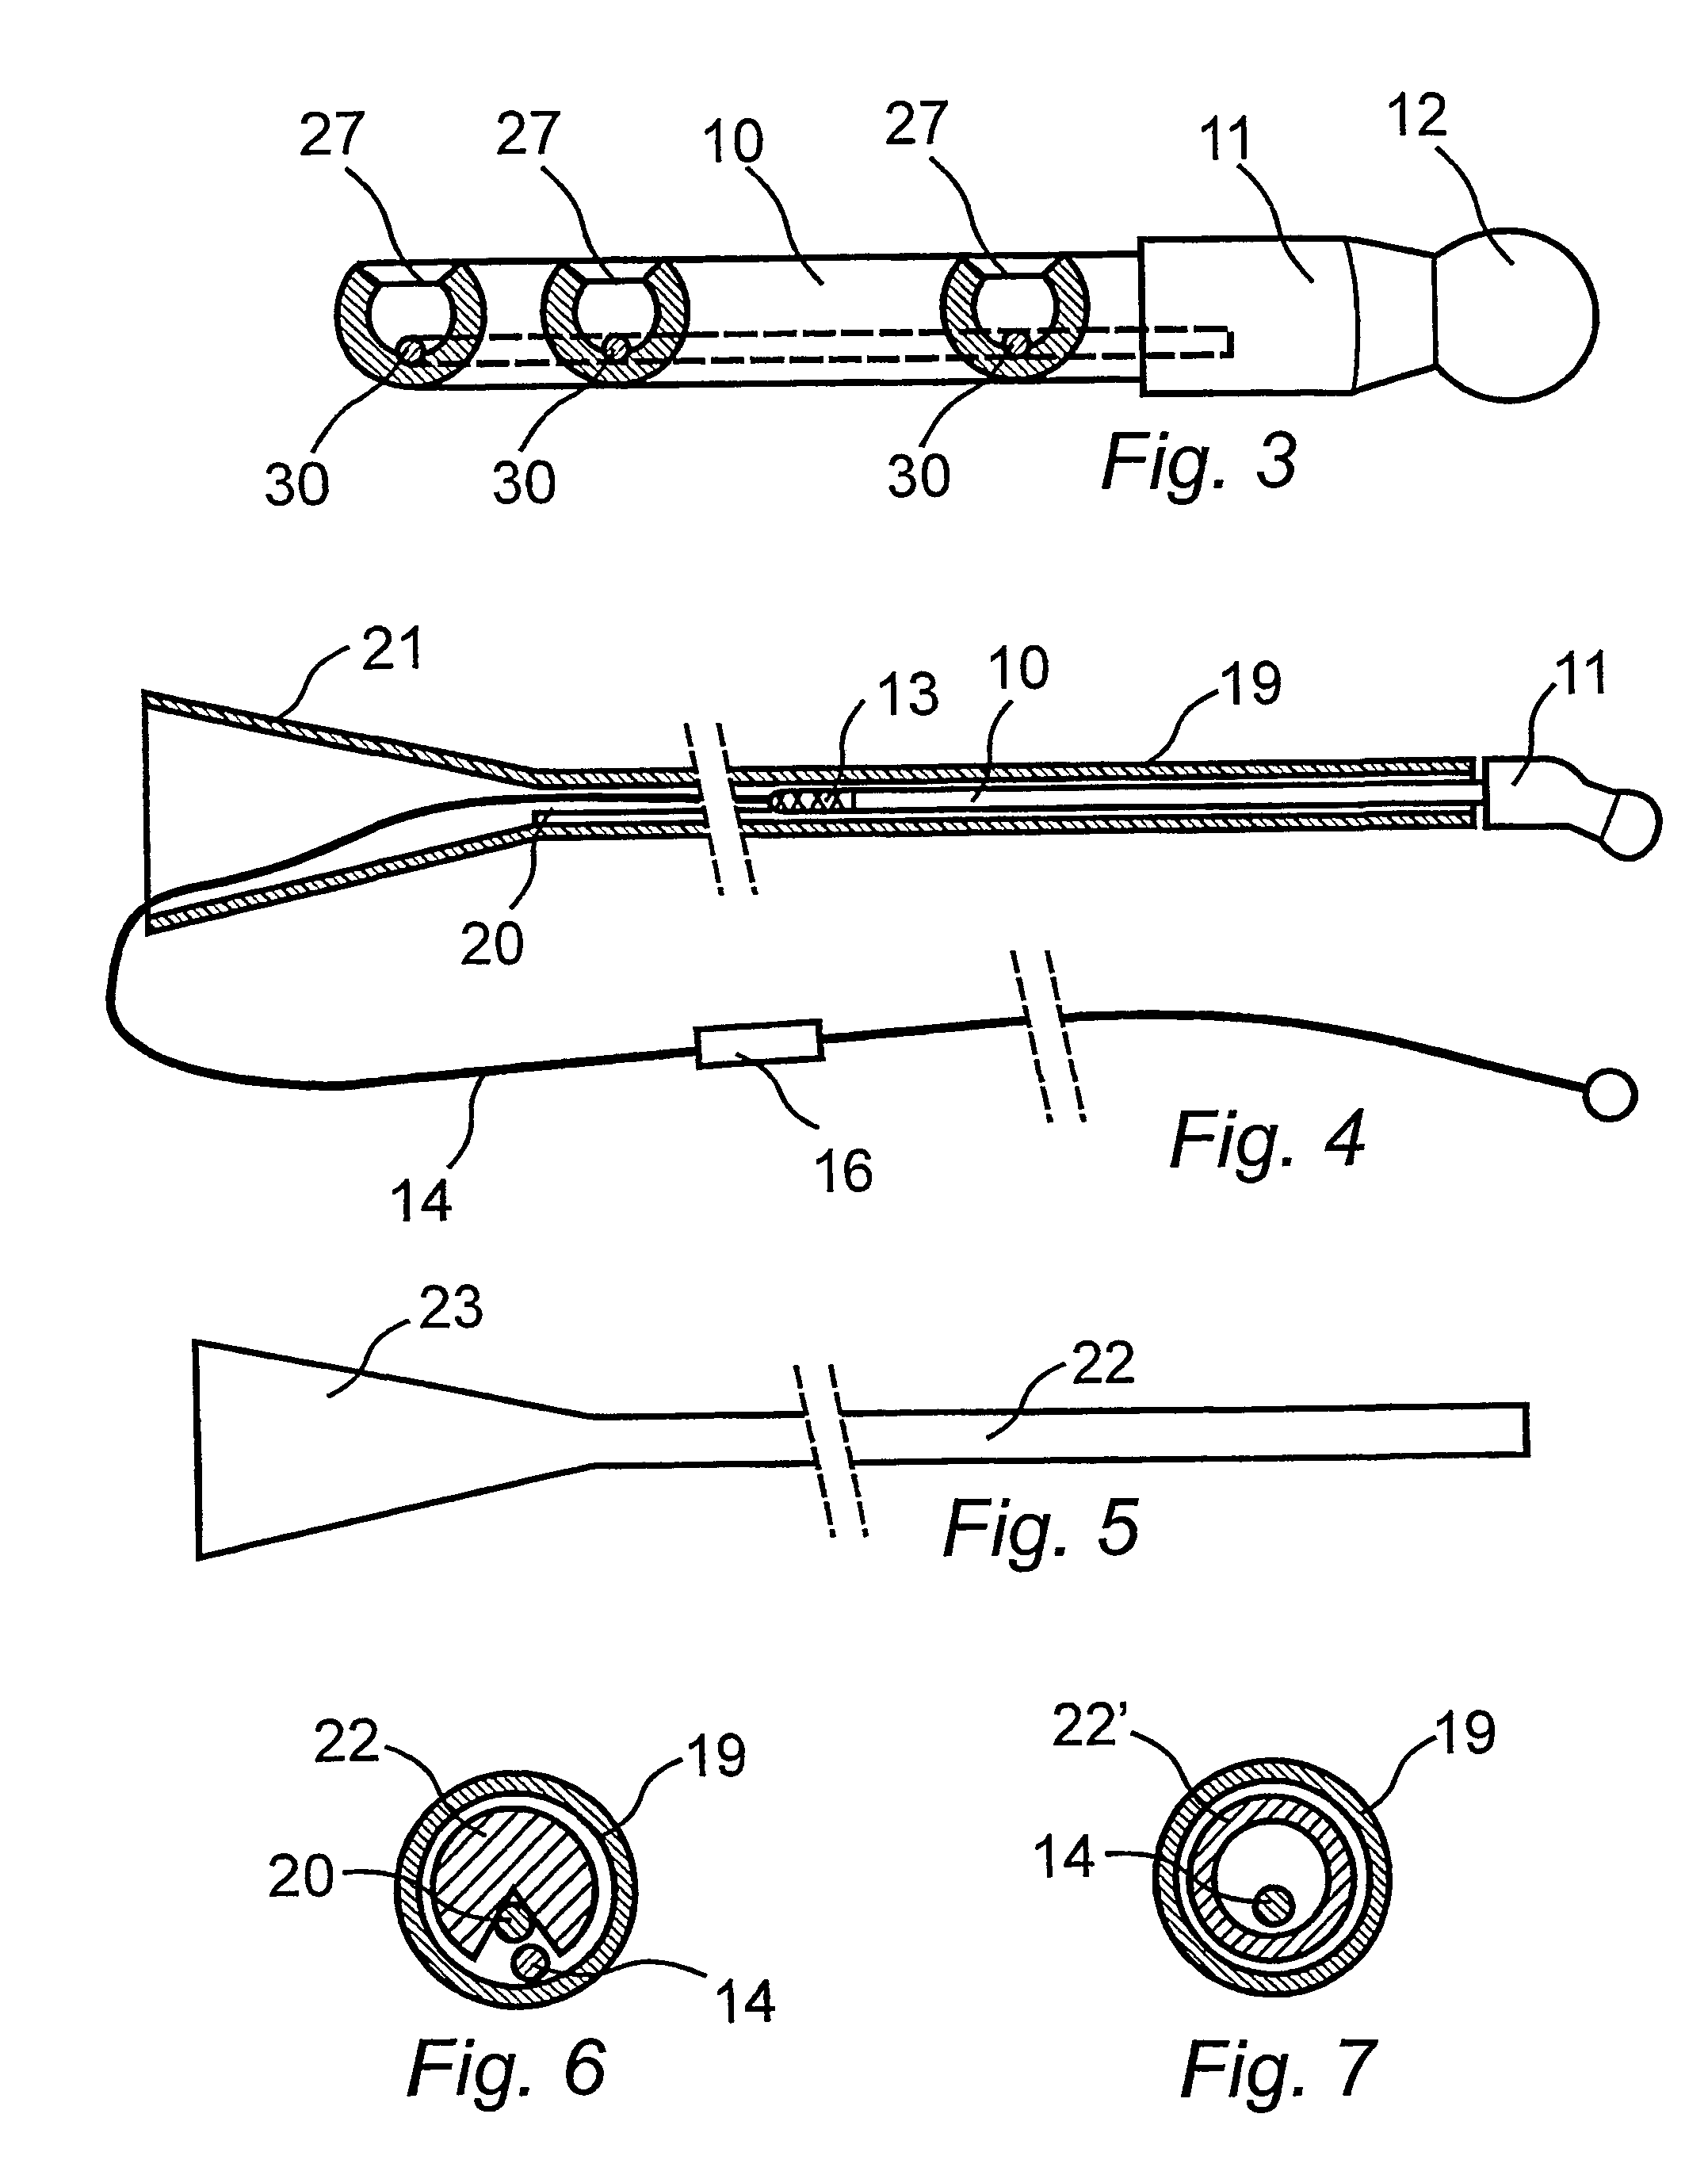 Method and apparatus for self-draining of urine